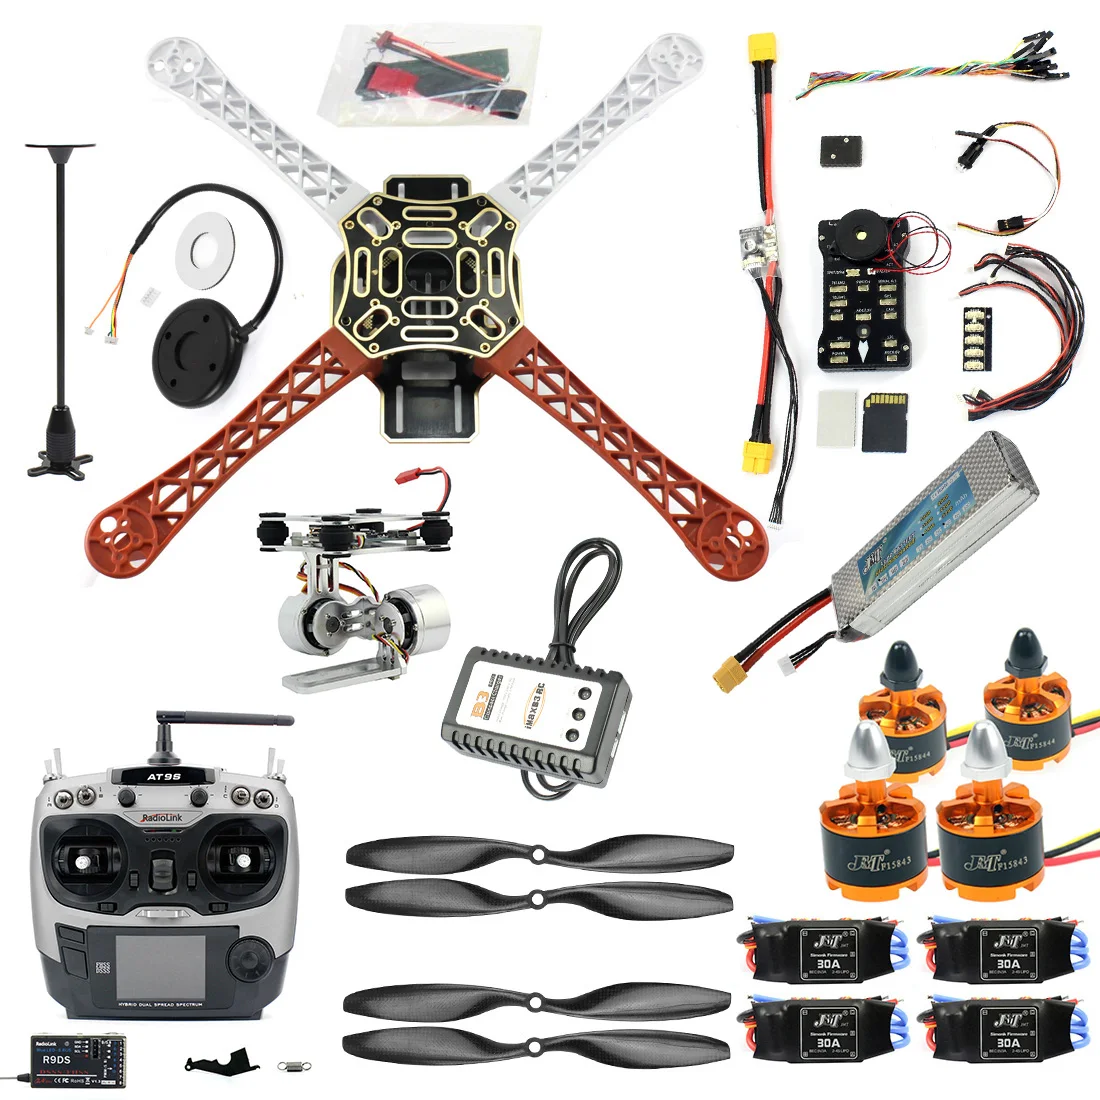 

DIY FPV Drone Quadcopter 4-axle Aircraft Kit F450 450 Frame PXI PX4 Flight Control 920KV Motor GPS AT9S Transmitter Set